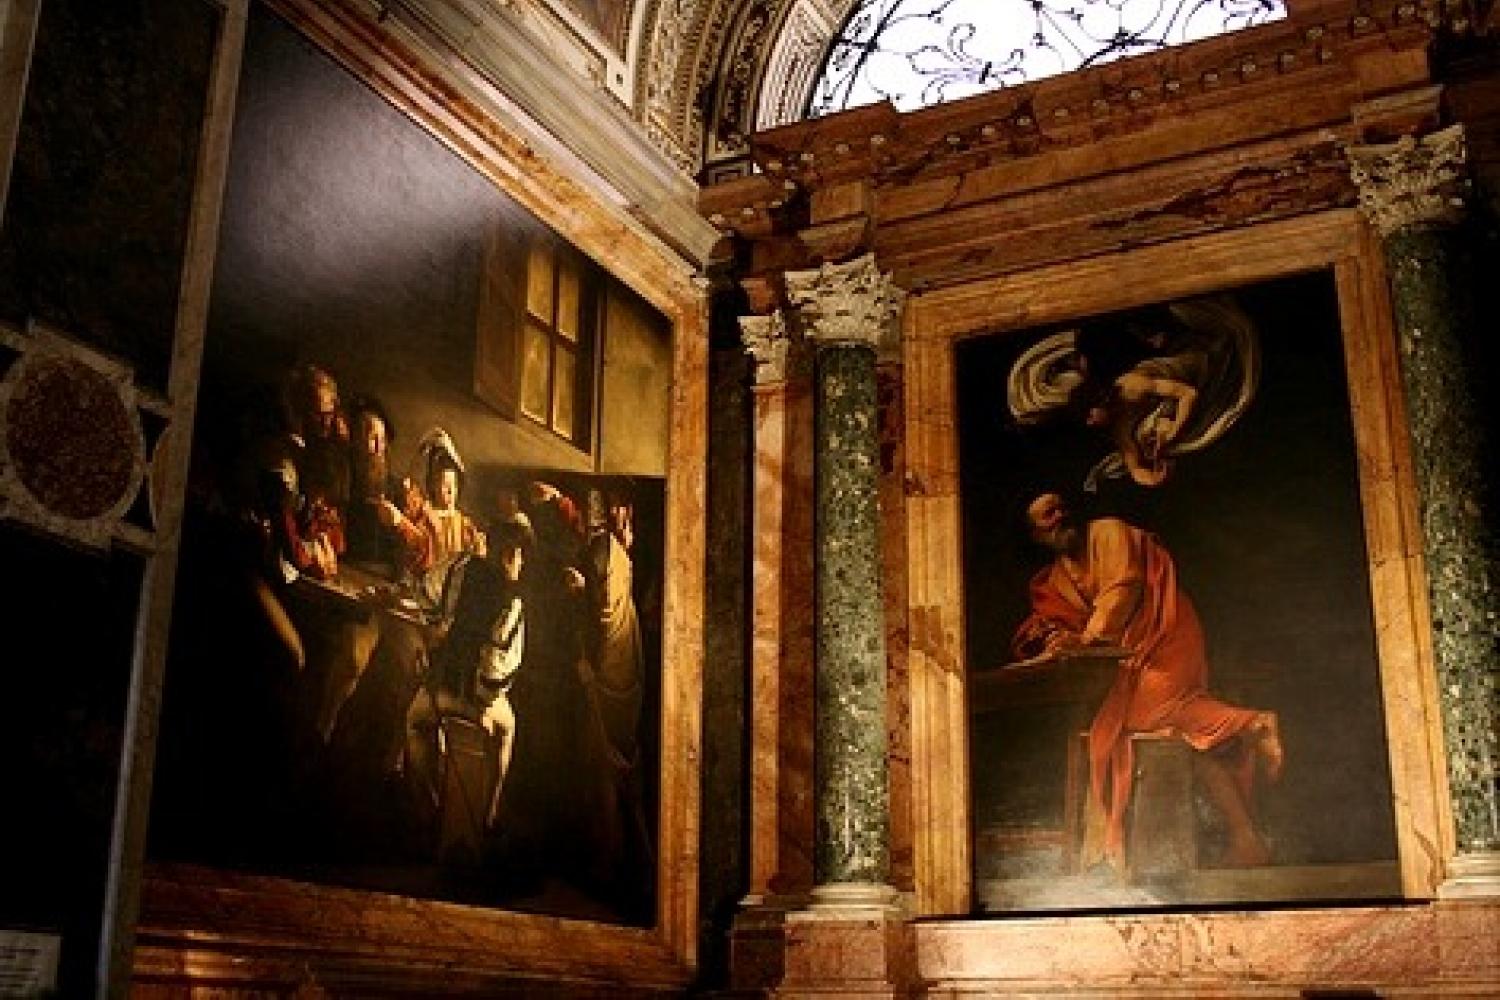 Caravaggio's "The Calling of Saint Matthew" and "The Inspiration of Saint Matthew" in the Contarelli Chapel